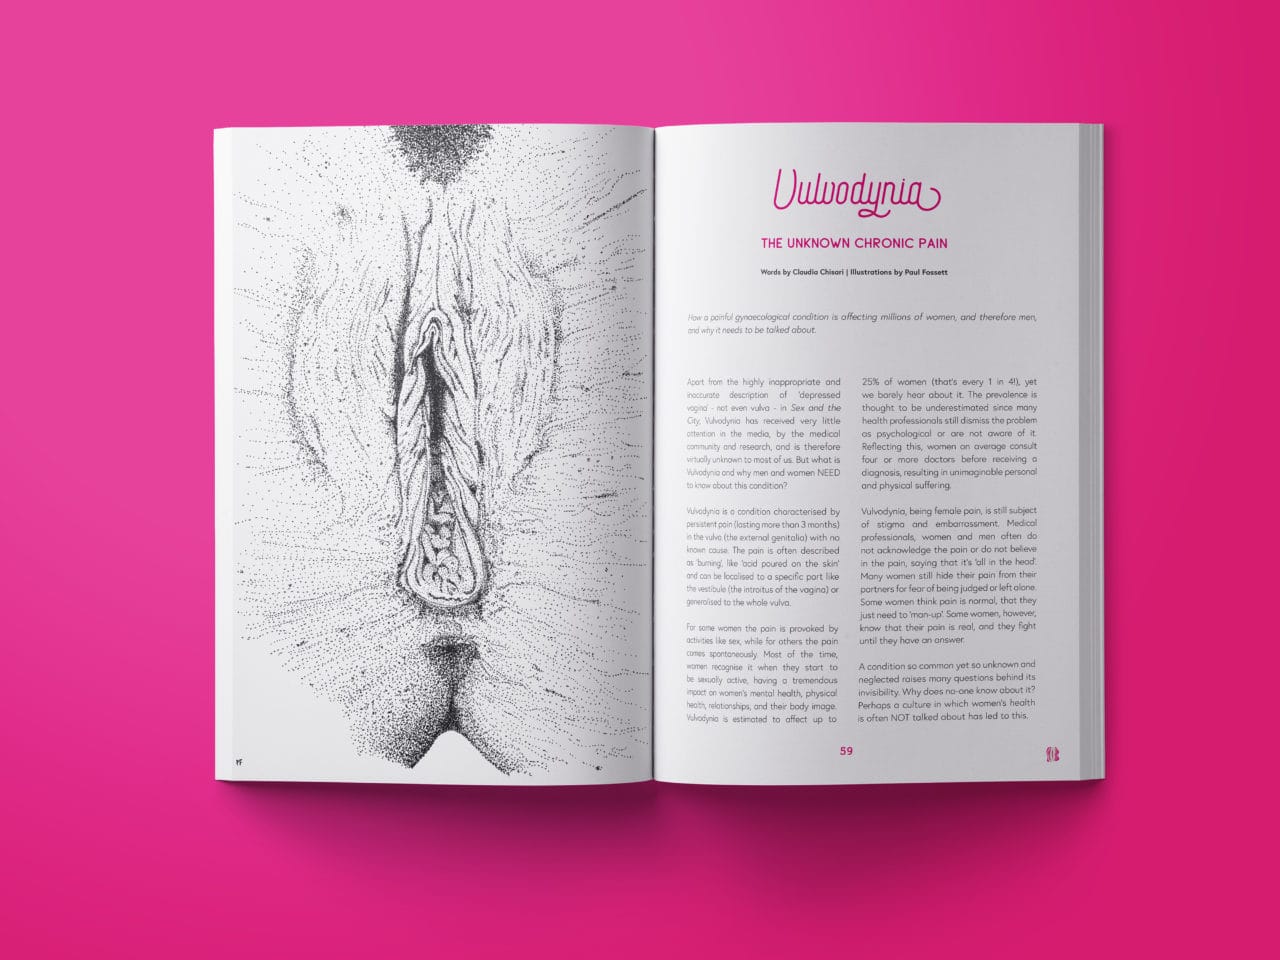 Some pages of Vagina-nomics about Vulvodynia, on the left page there is a black and white drawing of a vulva and on the right there is text.